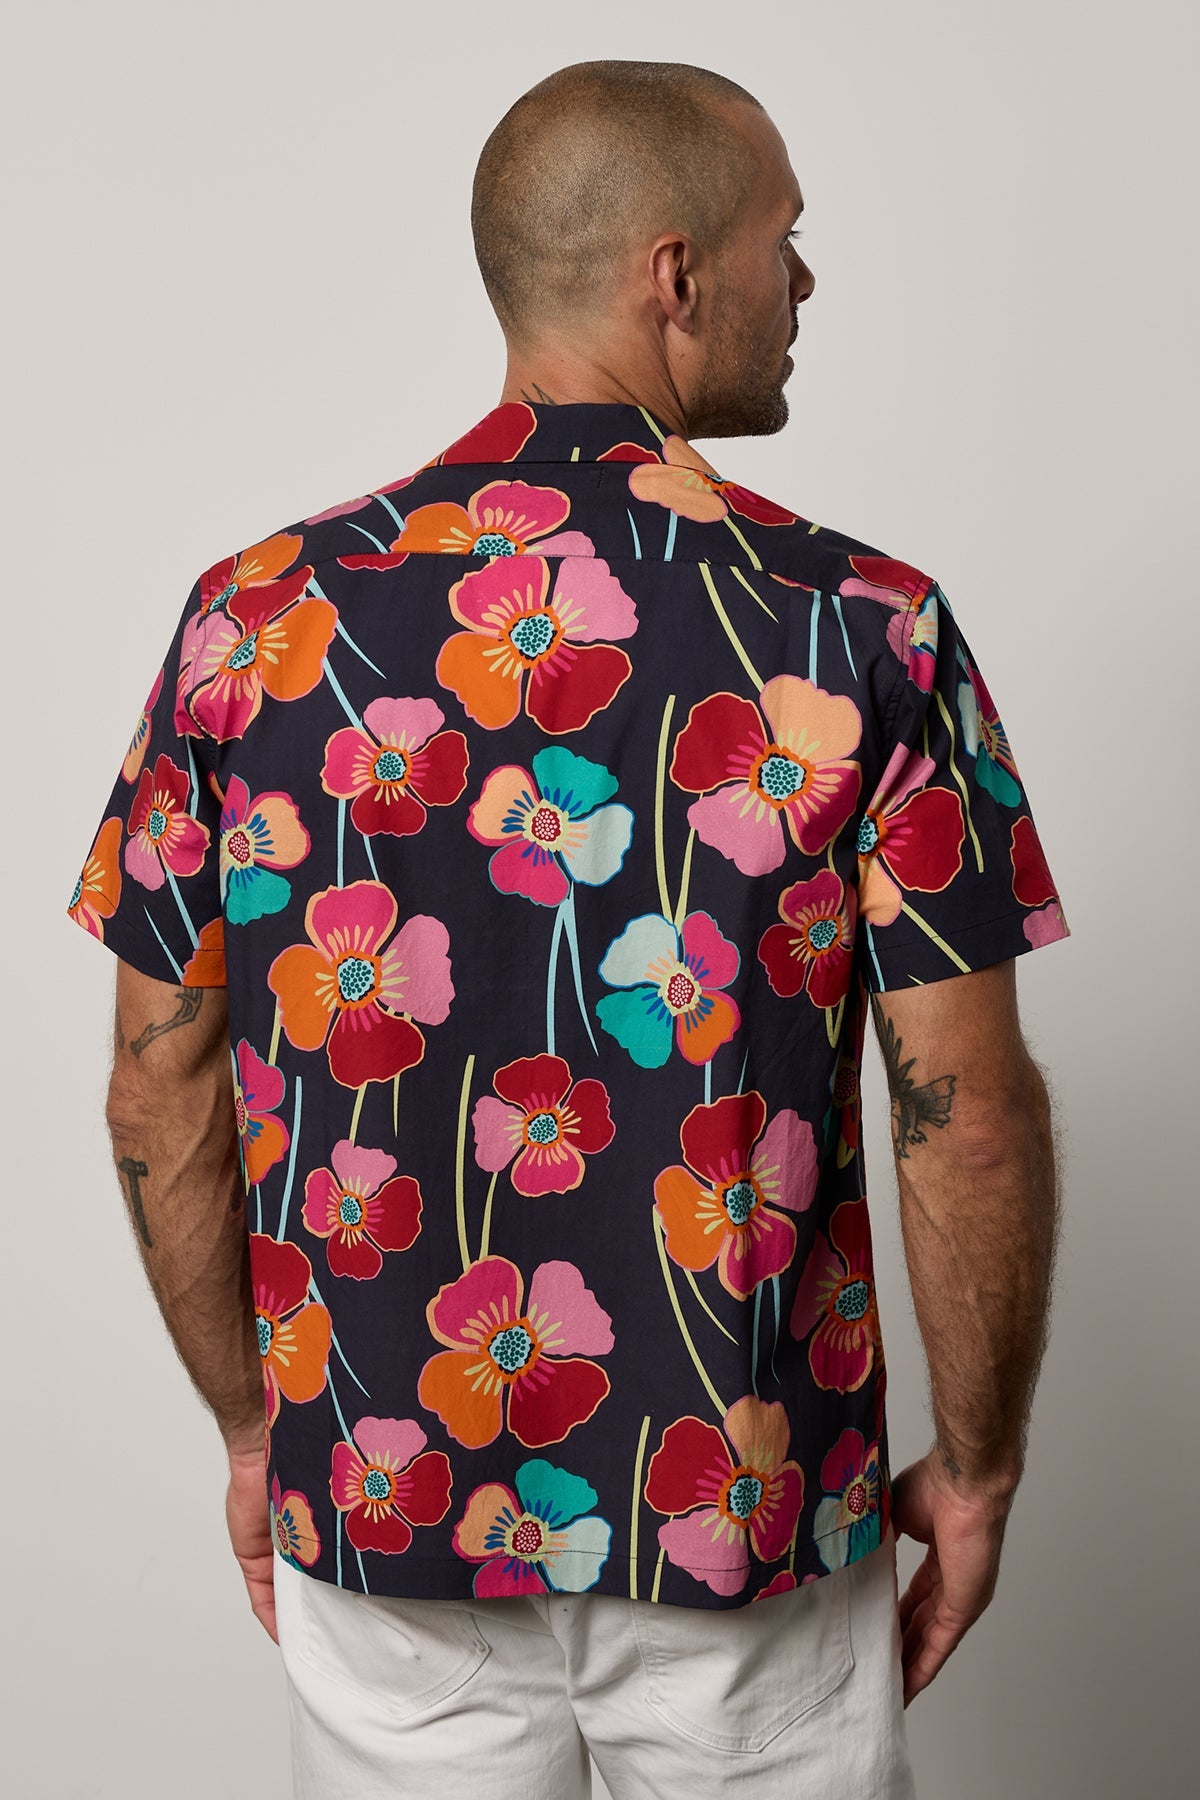 Iggy Button up shirt in Bahama print with large bold modern flower print on dark background with white denim back-26801039016129